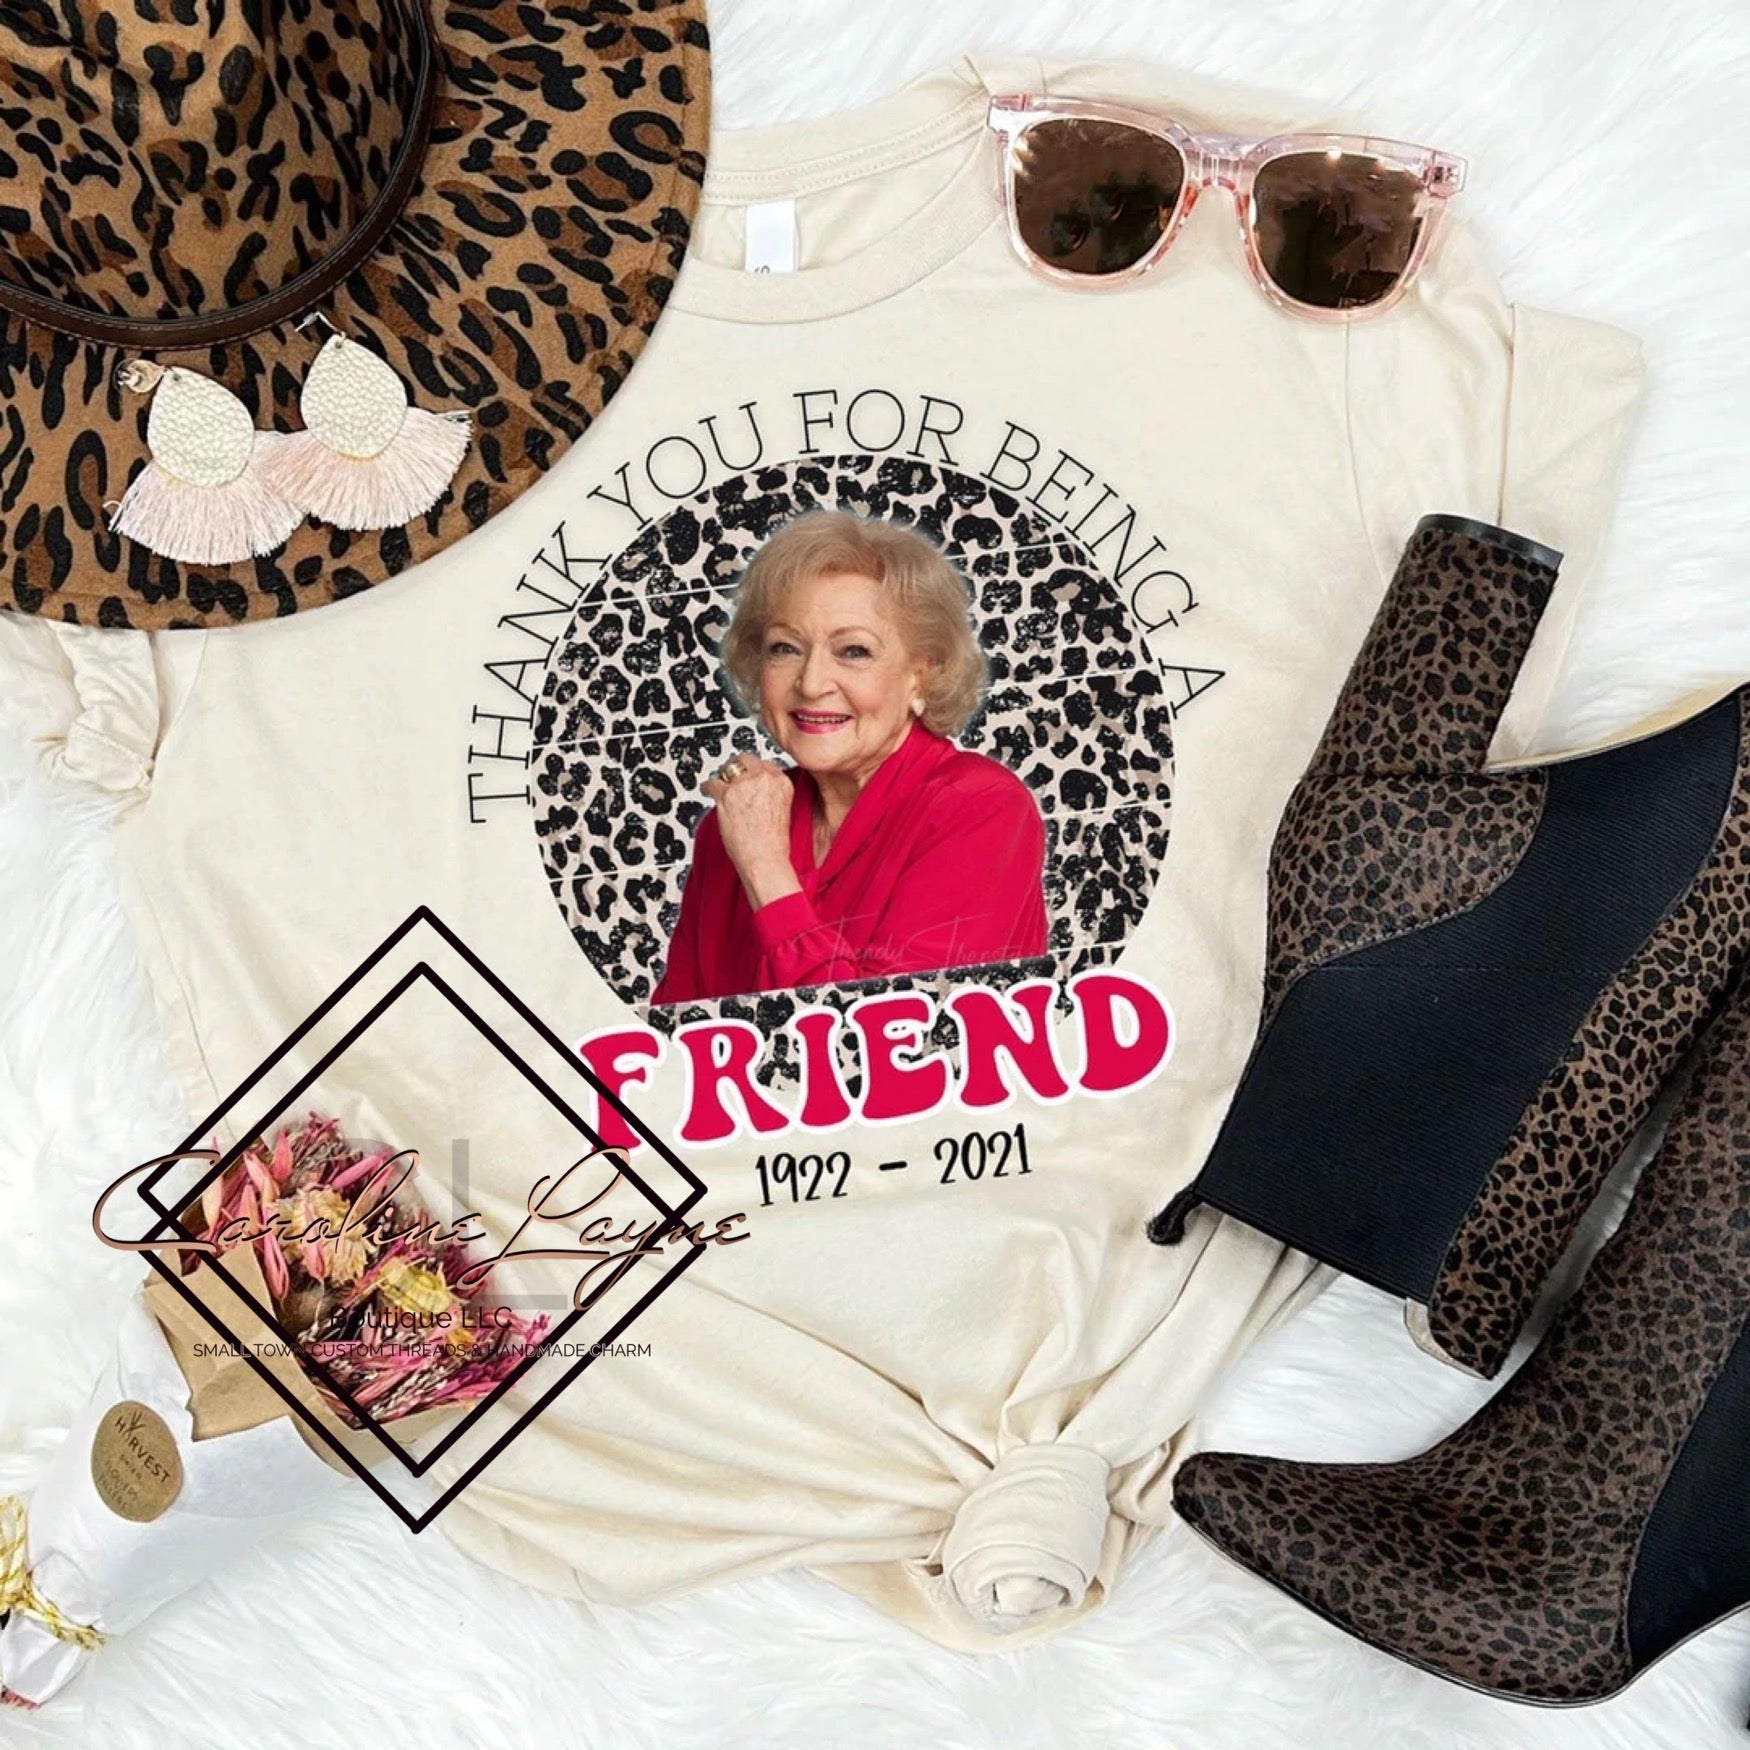 Thank You For Being A Friend Tee - Caroline Layne Boutique LLC